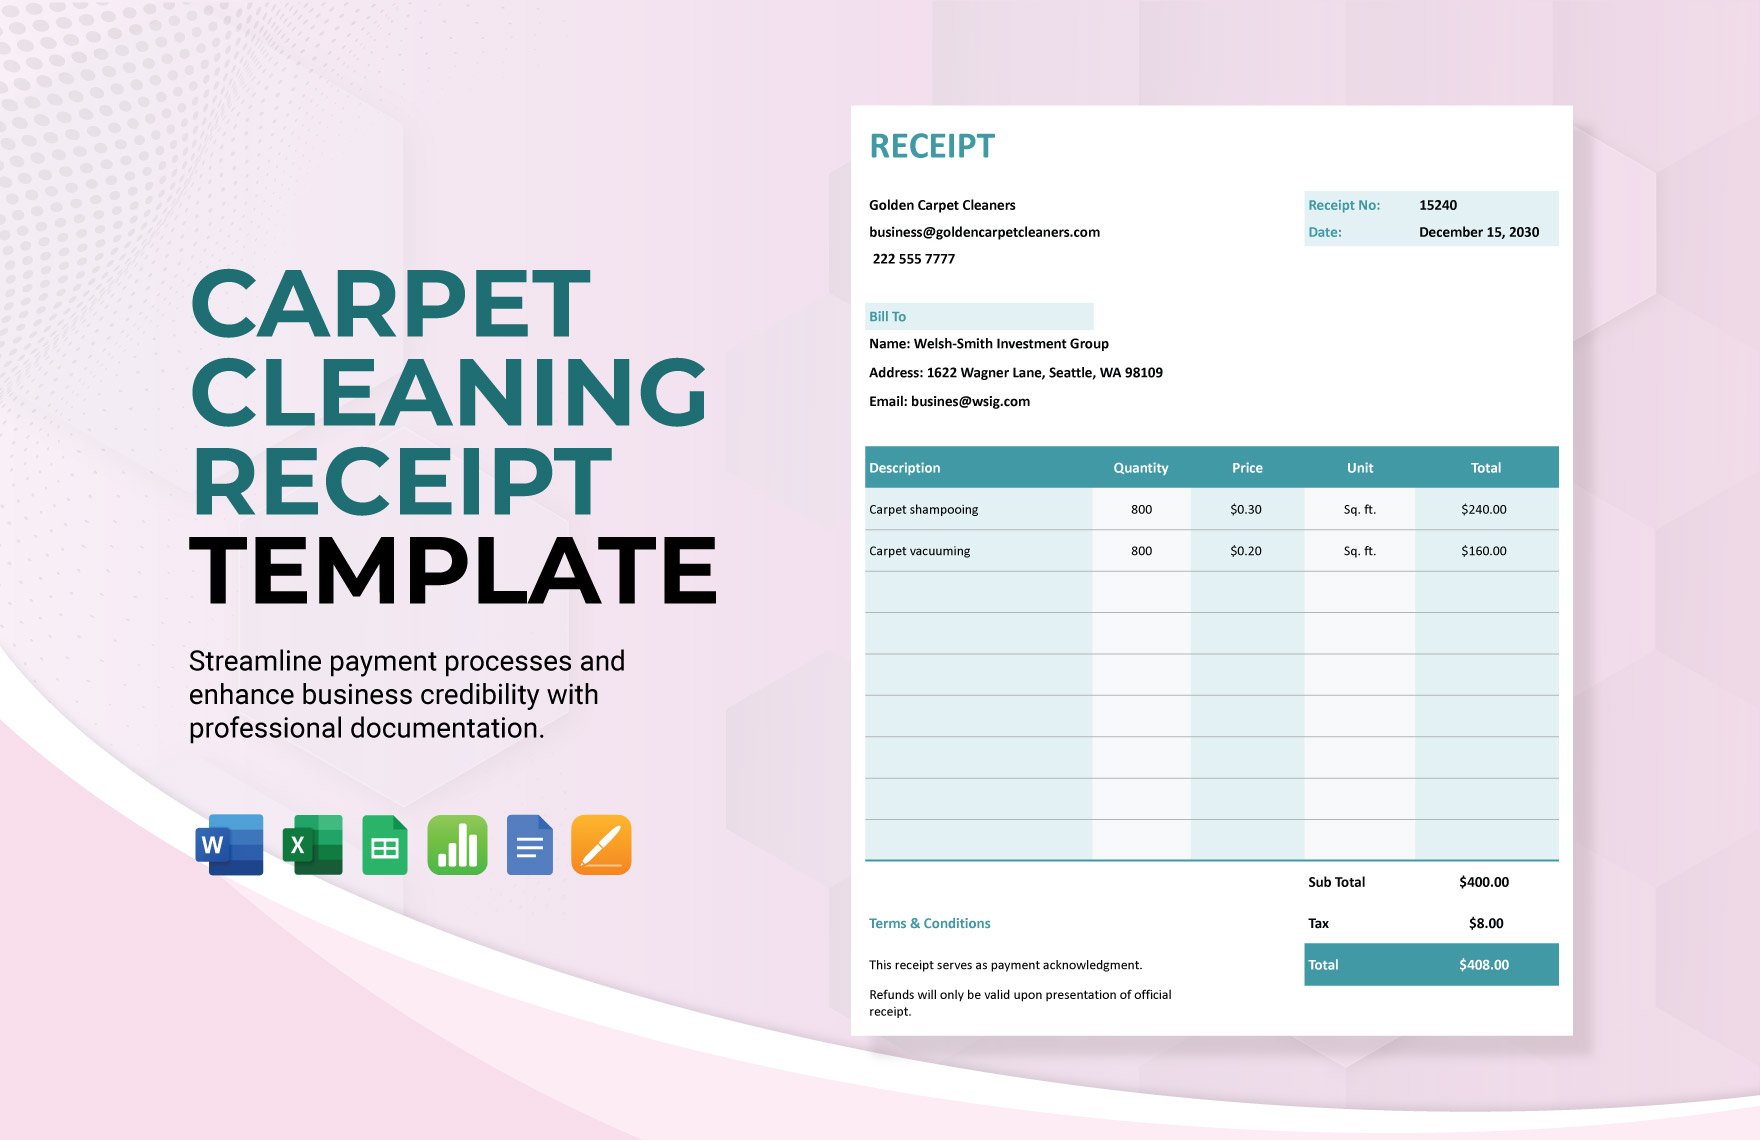 Carpet Cleaning Receipt Template in Word, Google Docs, Excel, Google Sheets, Apple Pages, Apple Numbers